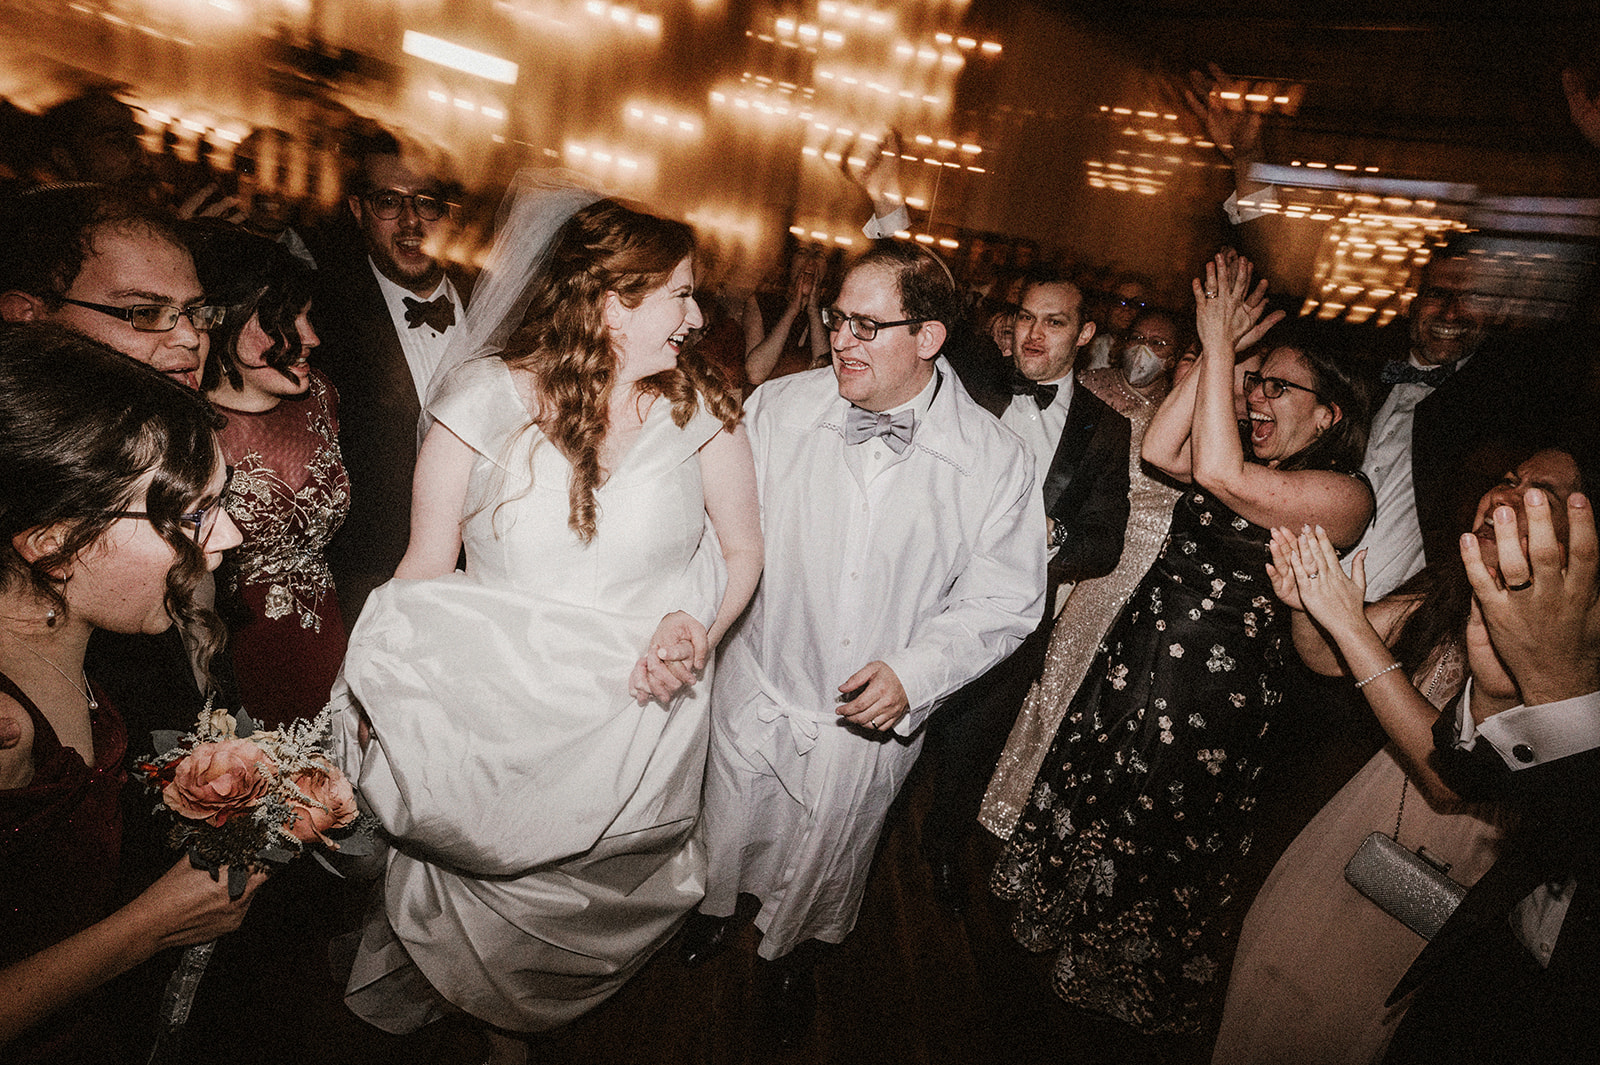 bride and groom joyfully escorted out of chuppah ceremony surrounded by family and friends